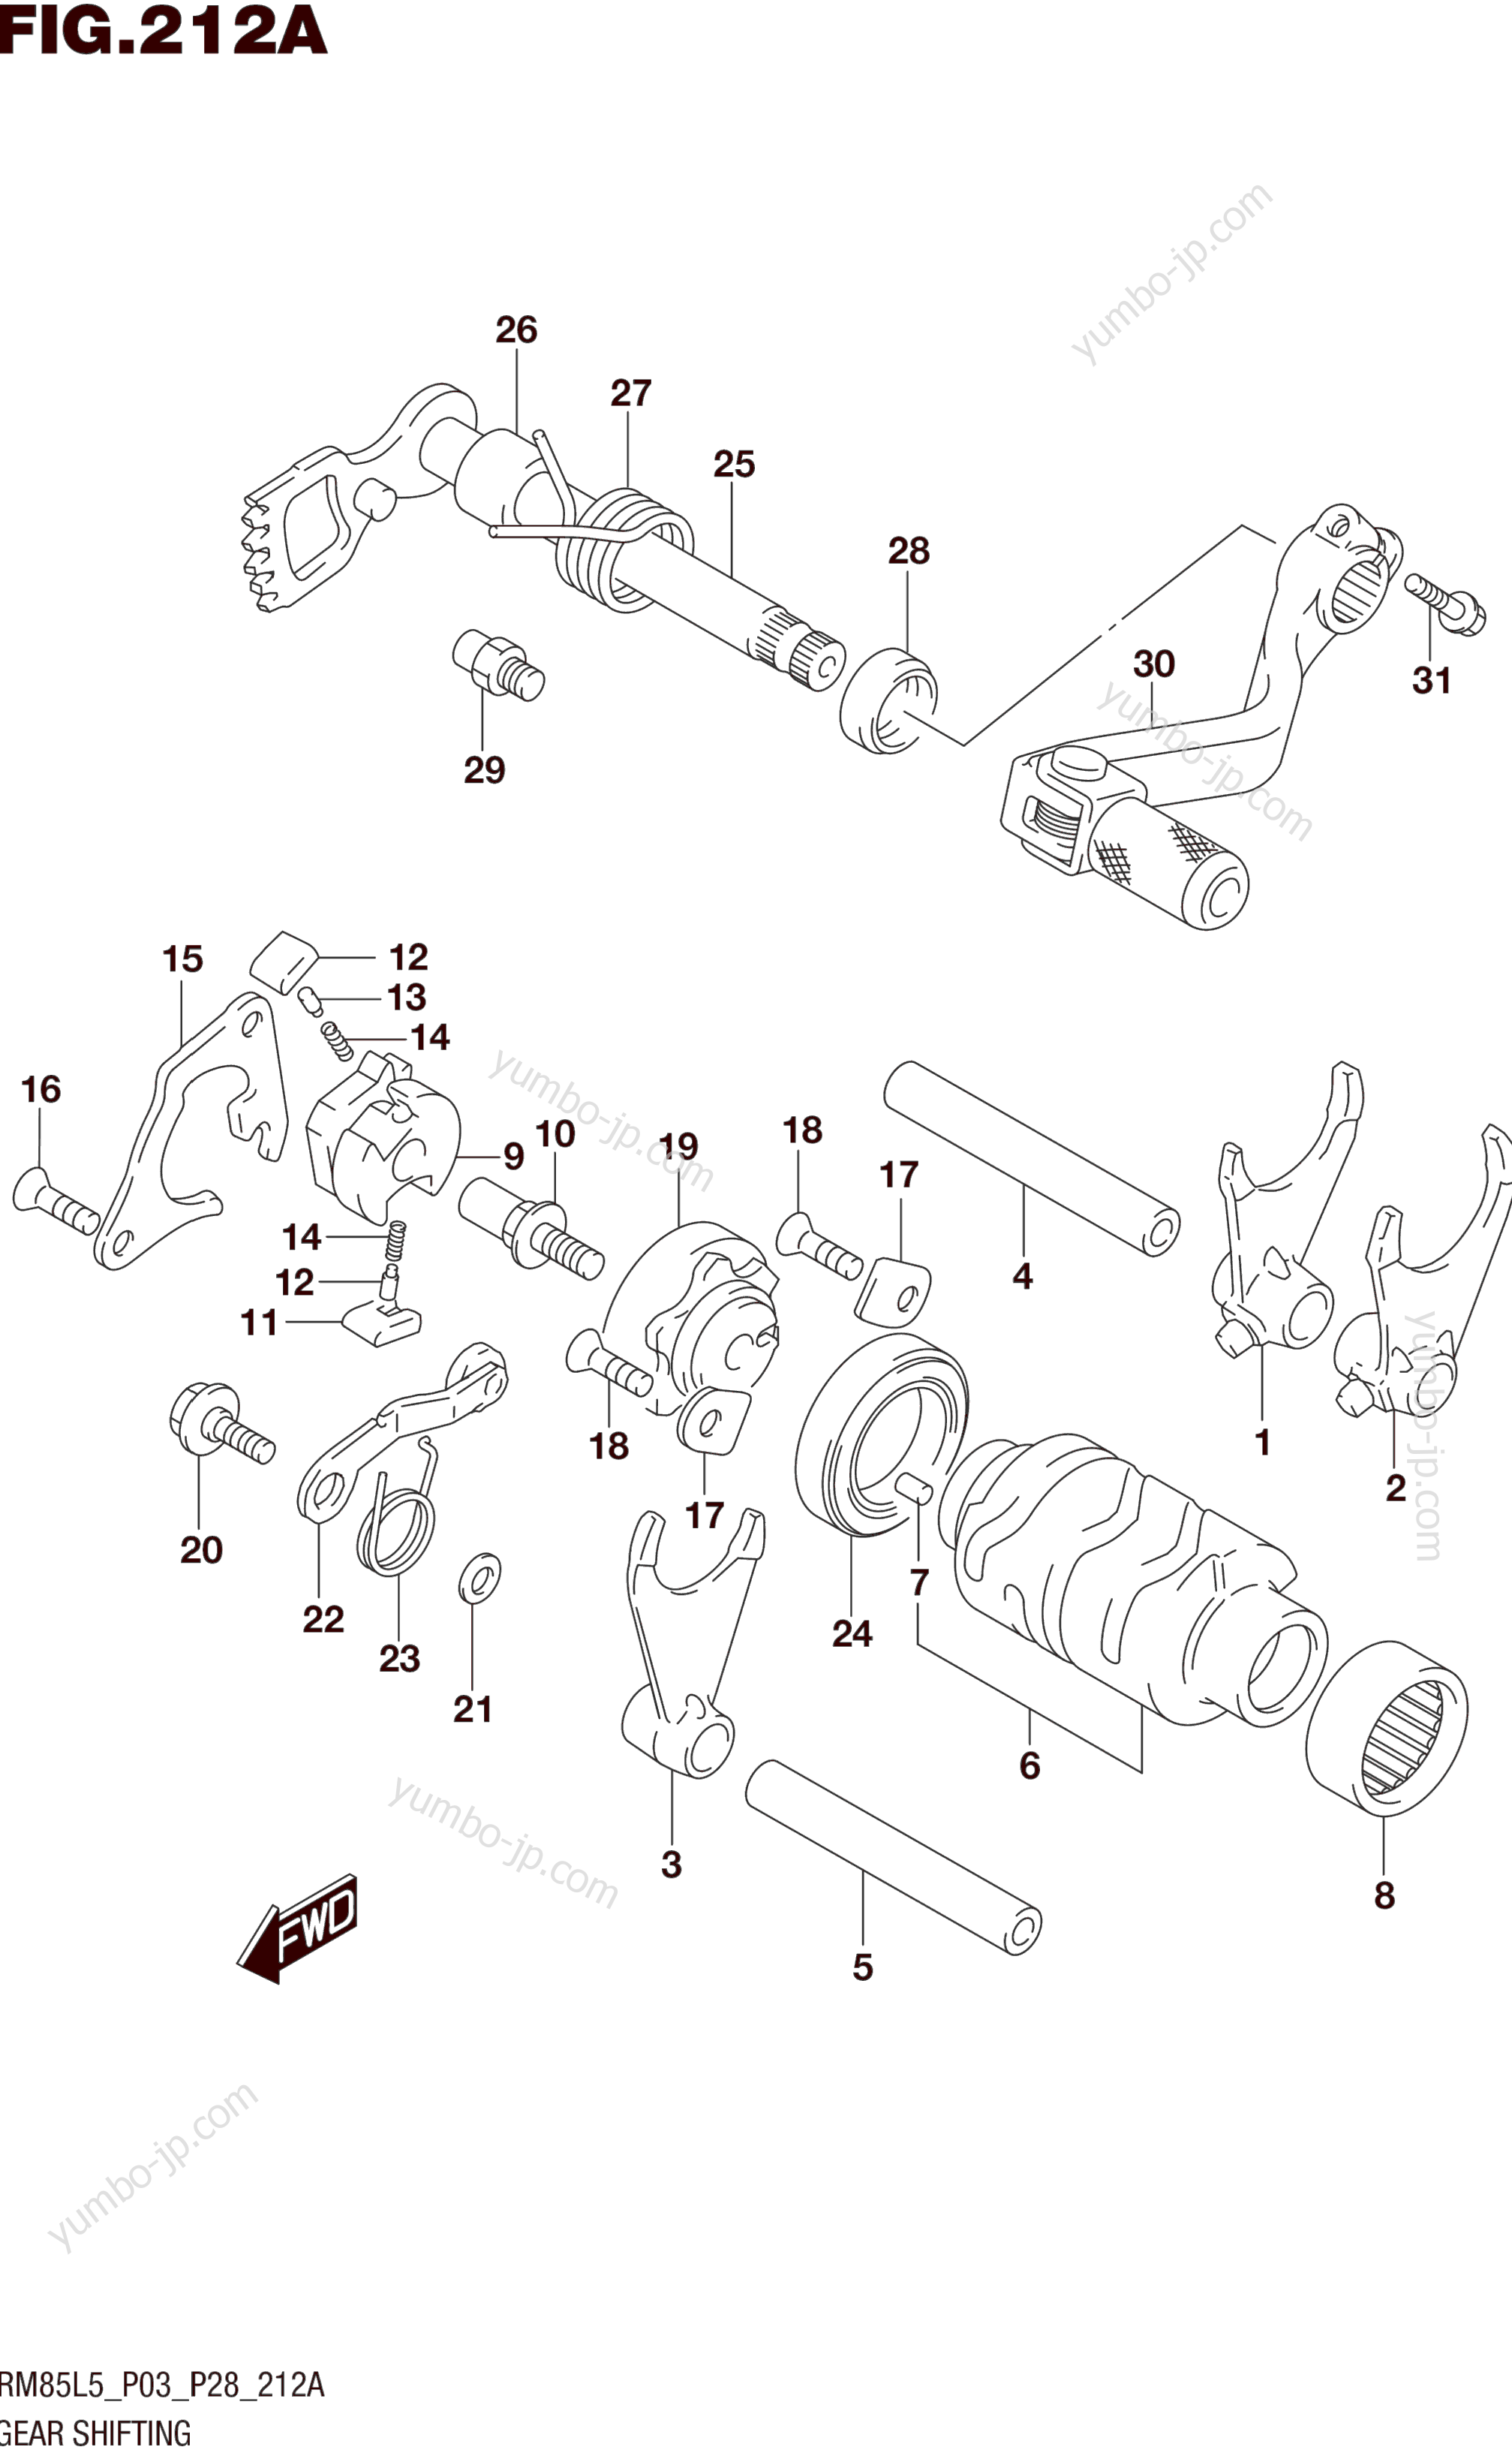 GEAR SHIFTING for motorcycles SUZUKI RM85 2015 year